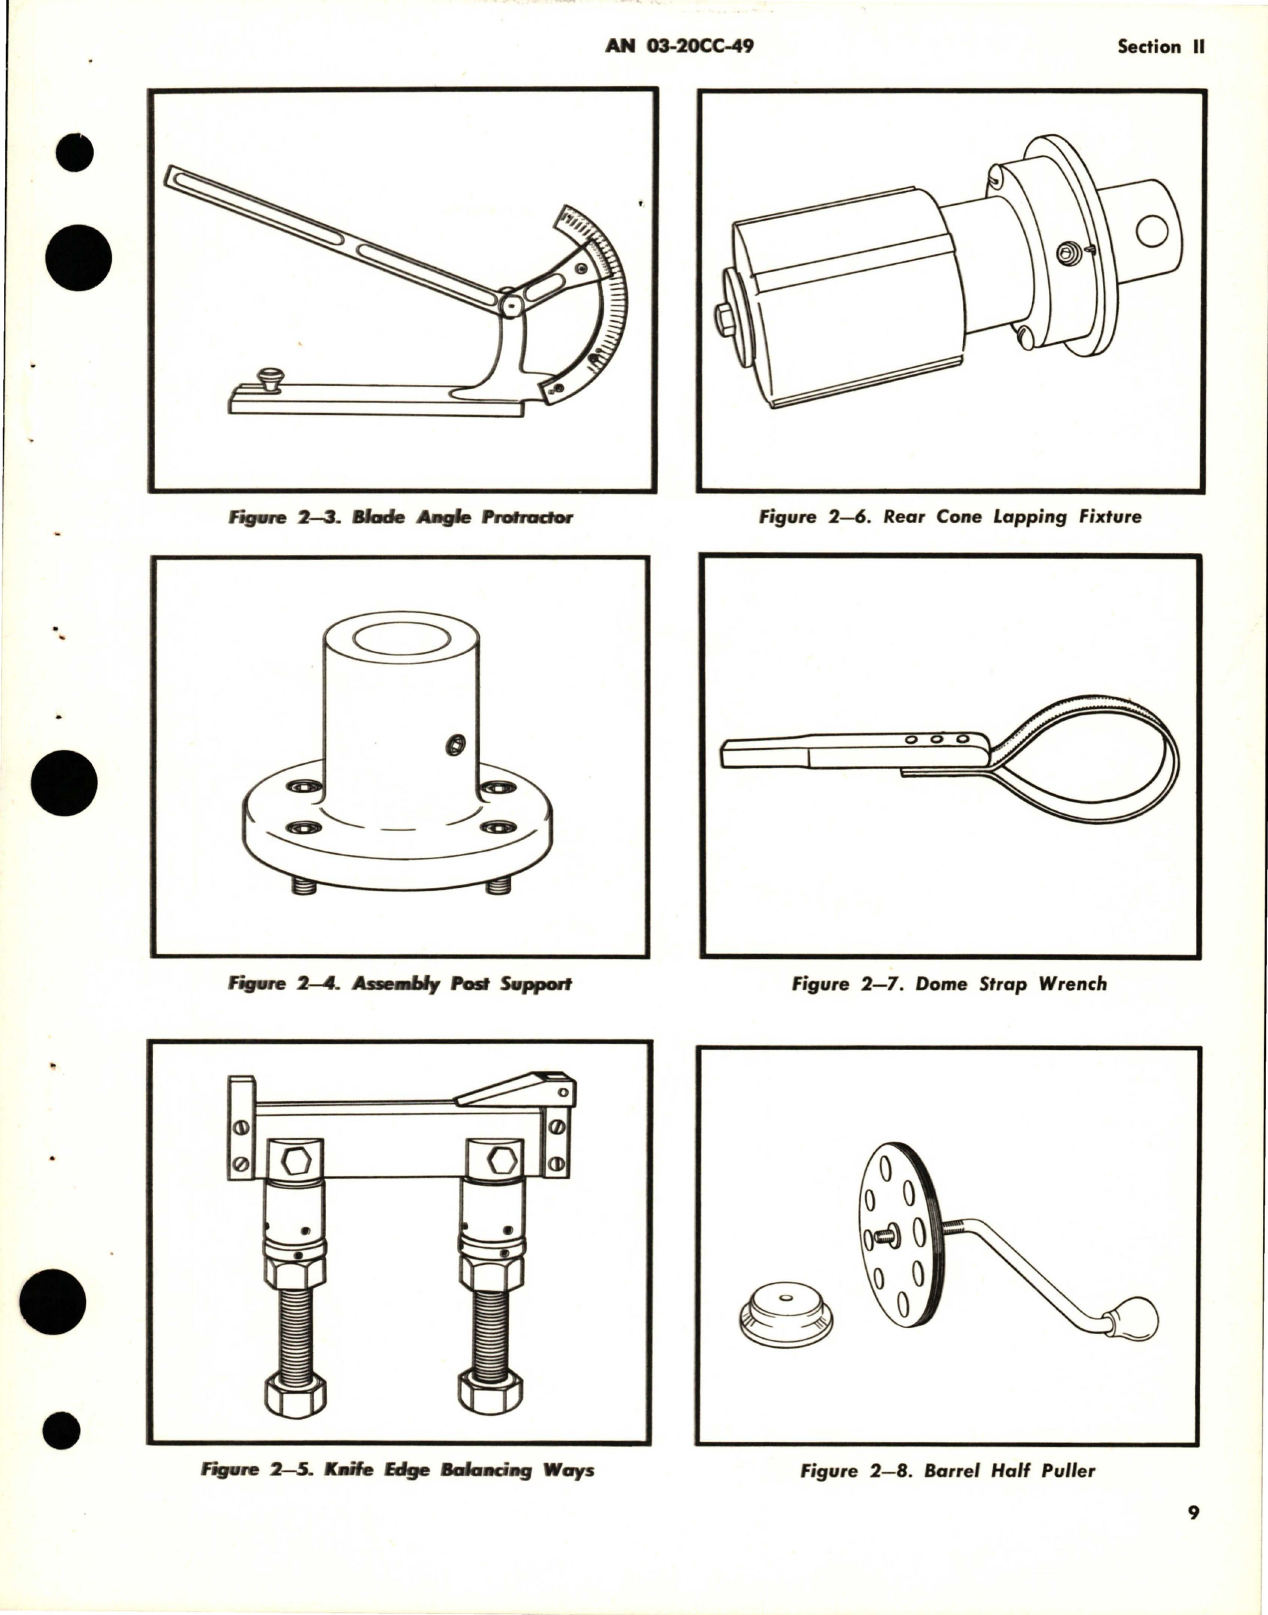 Sample page 9 from AirCorps Library document: Overhaul Instructions for Hydromatic Propellers and Bracket Assemblies